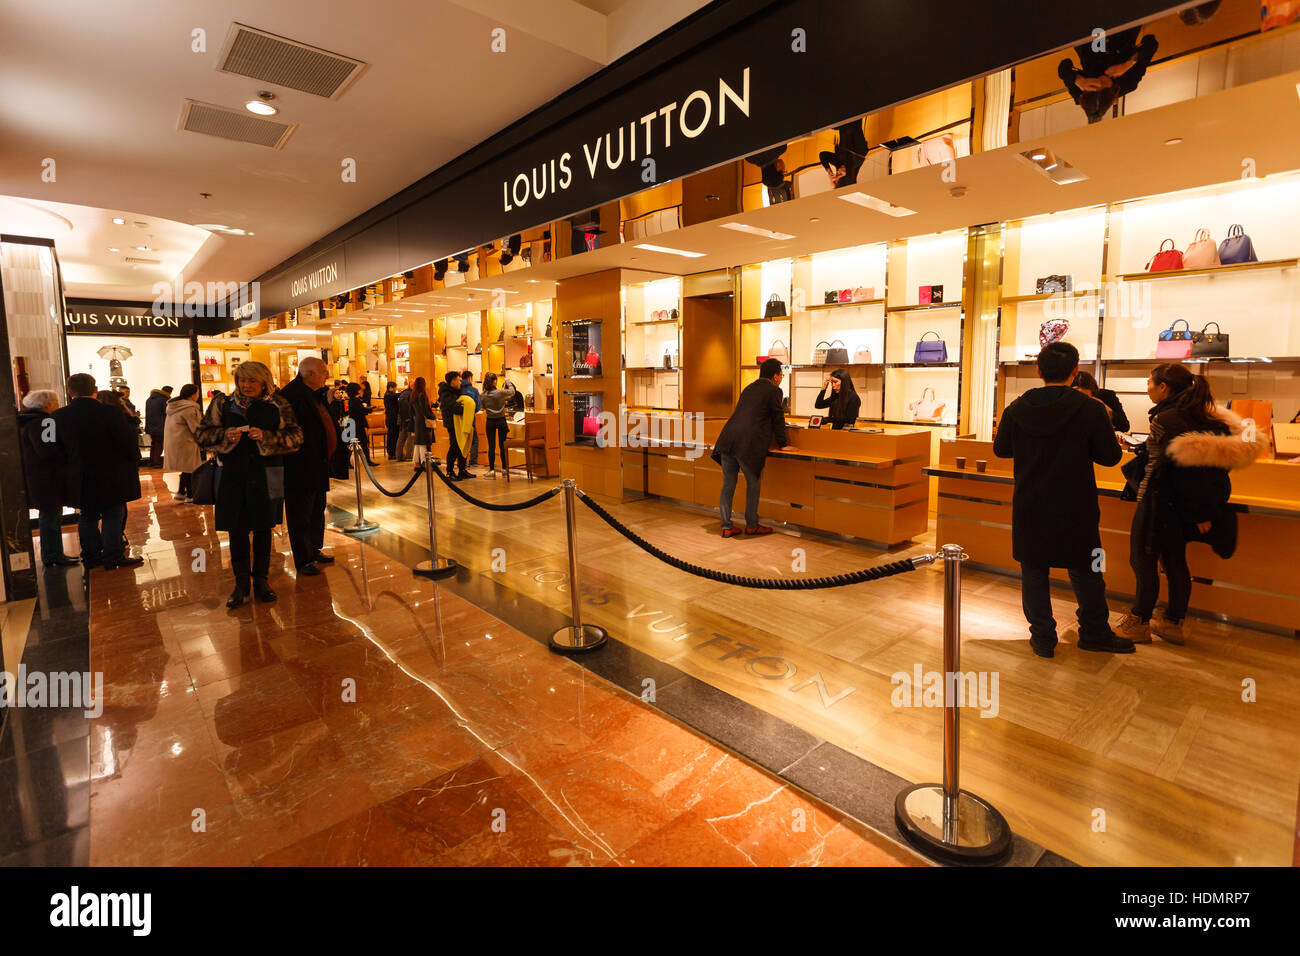 Louis Vuitton shopping store in France at night with Christmas g – Stock  Editorial Photo © ifeelstock #136291168